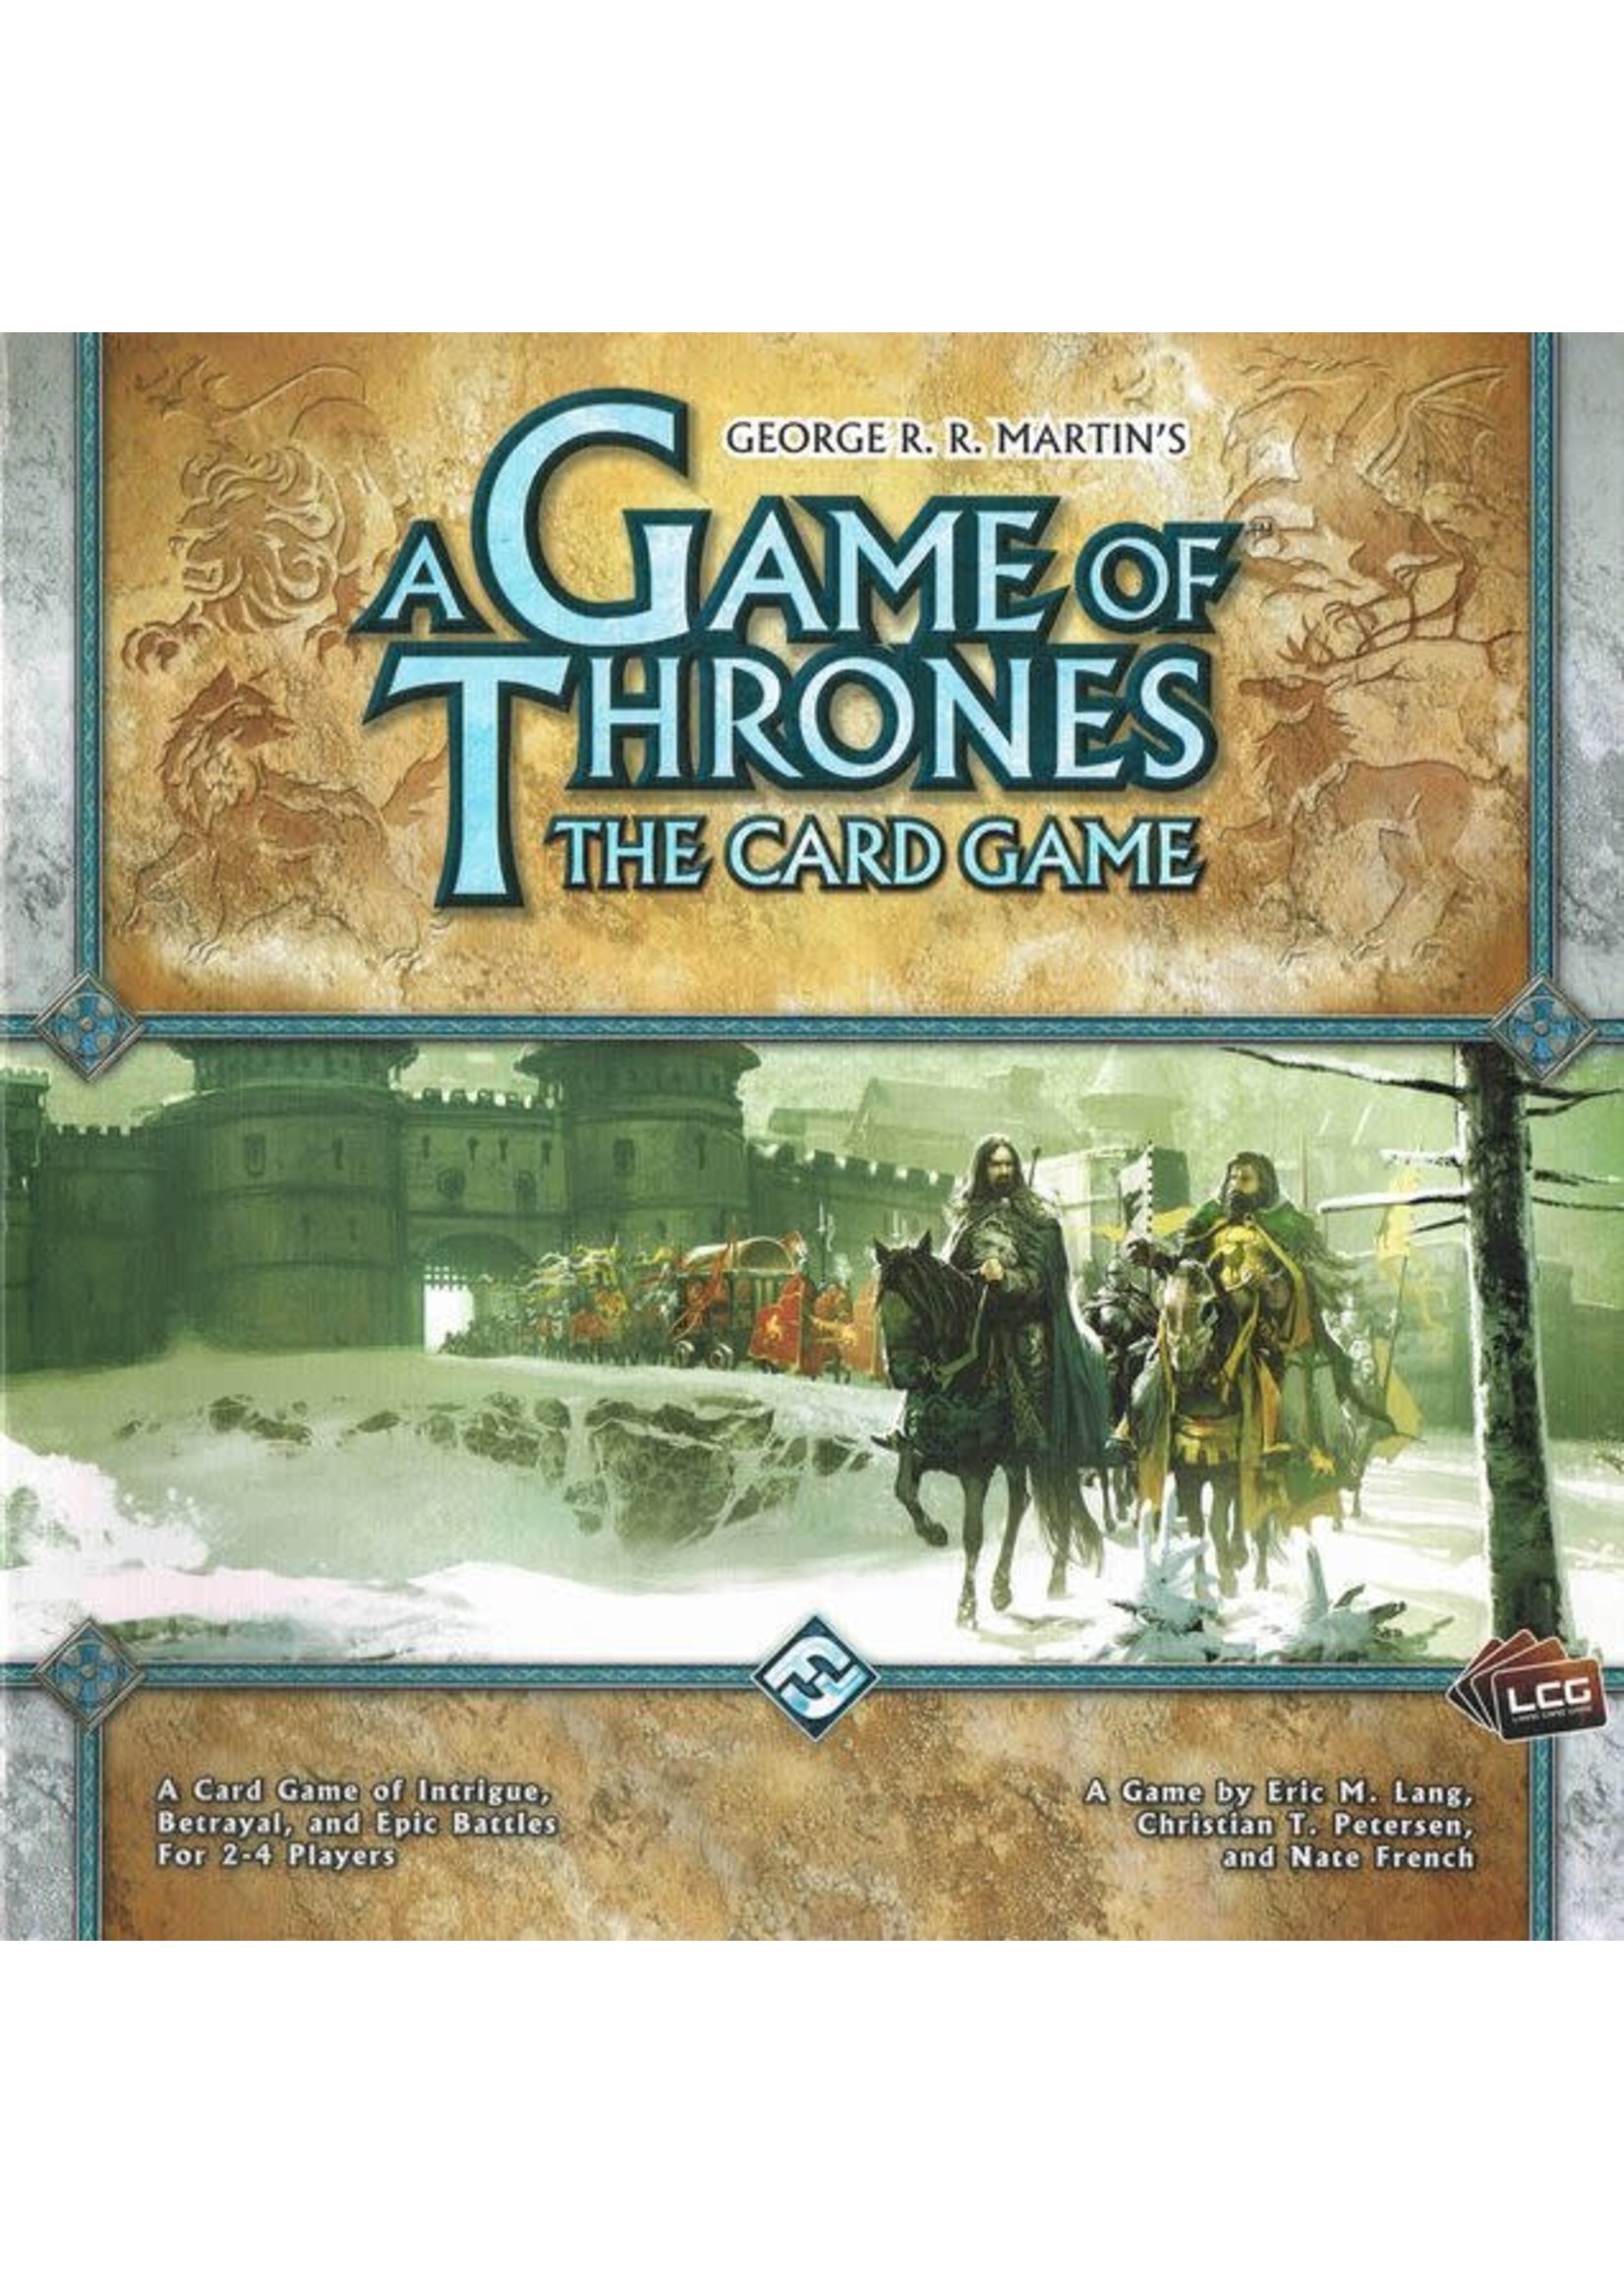 Rental RENTAL - A Game of Thrones the Card Game 1 Lb 11.8 oz